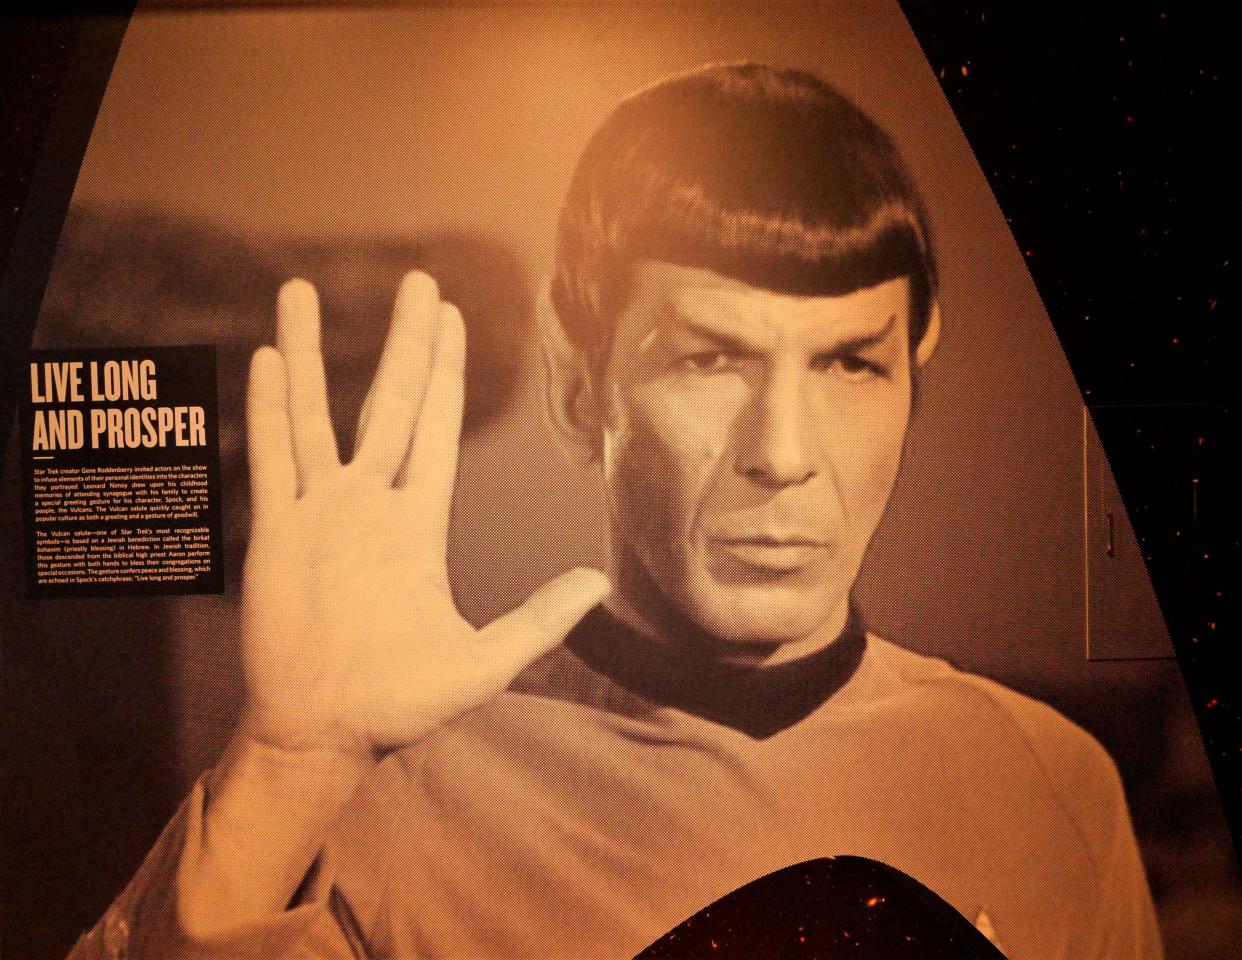 "Live long and prosper" was the motto of Spock, first portrayed by actor Leonard Nimoy in the original "Star Trek" TV series.